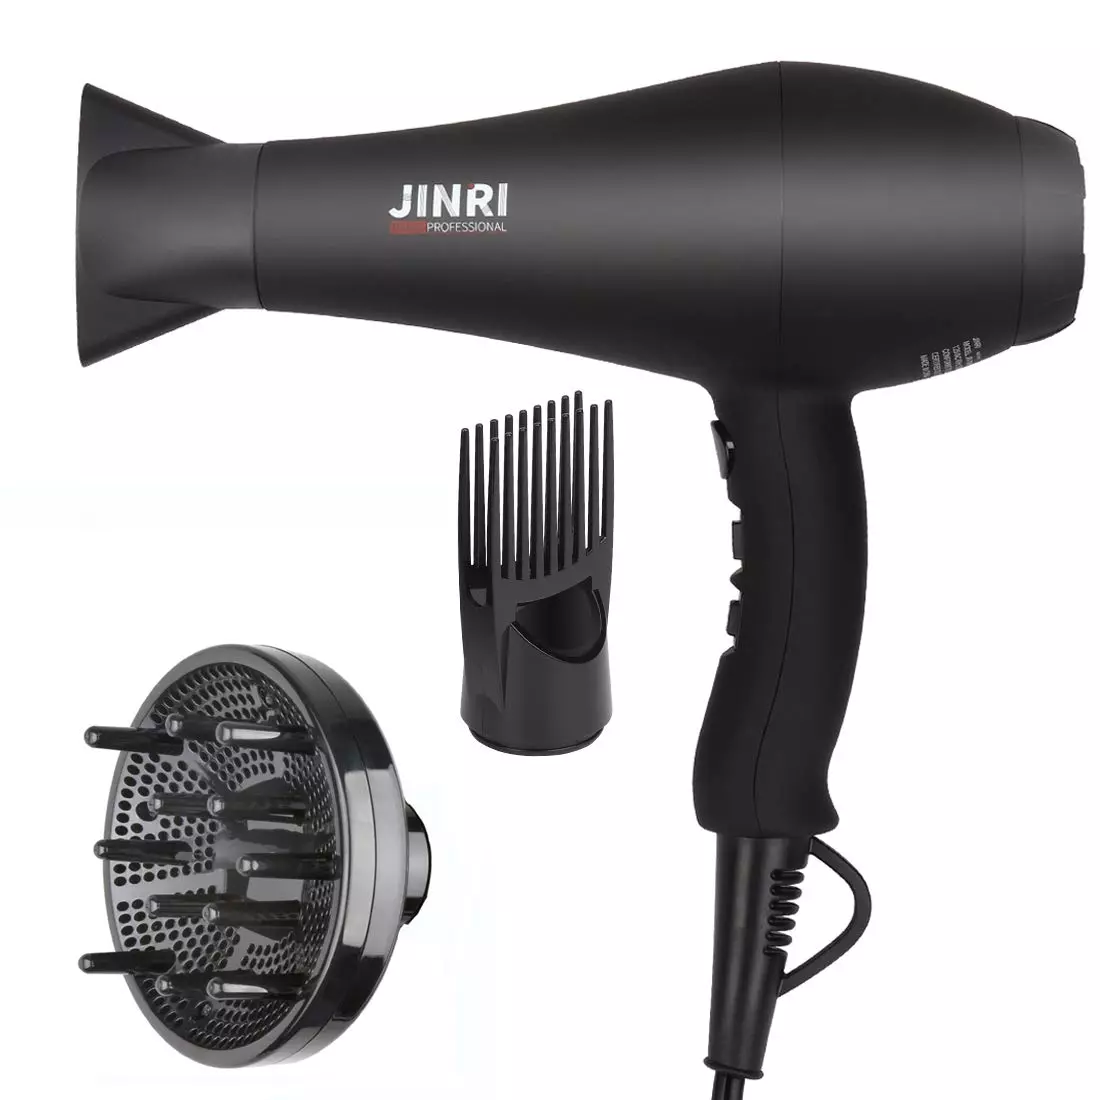 Hair Dryer 1875W, Negative Ionic Fast Dry Low Noise Blow Dryer, Professional Salon Hair Dryers with Diffuser, Concentrator, Styling Pik, 2 Speed and 3 Heat Settings Black